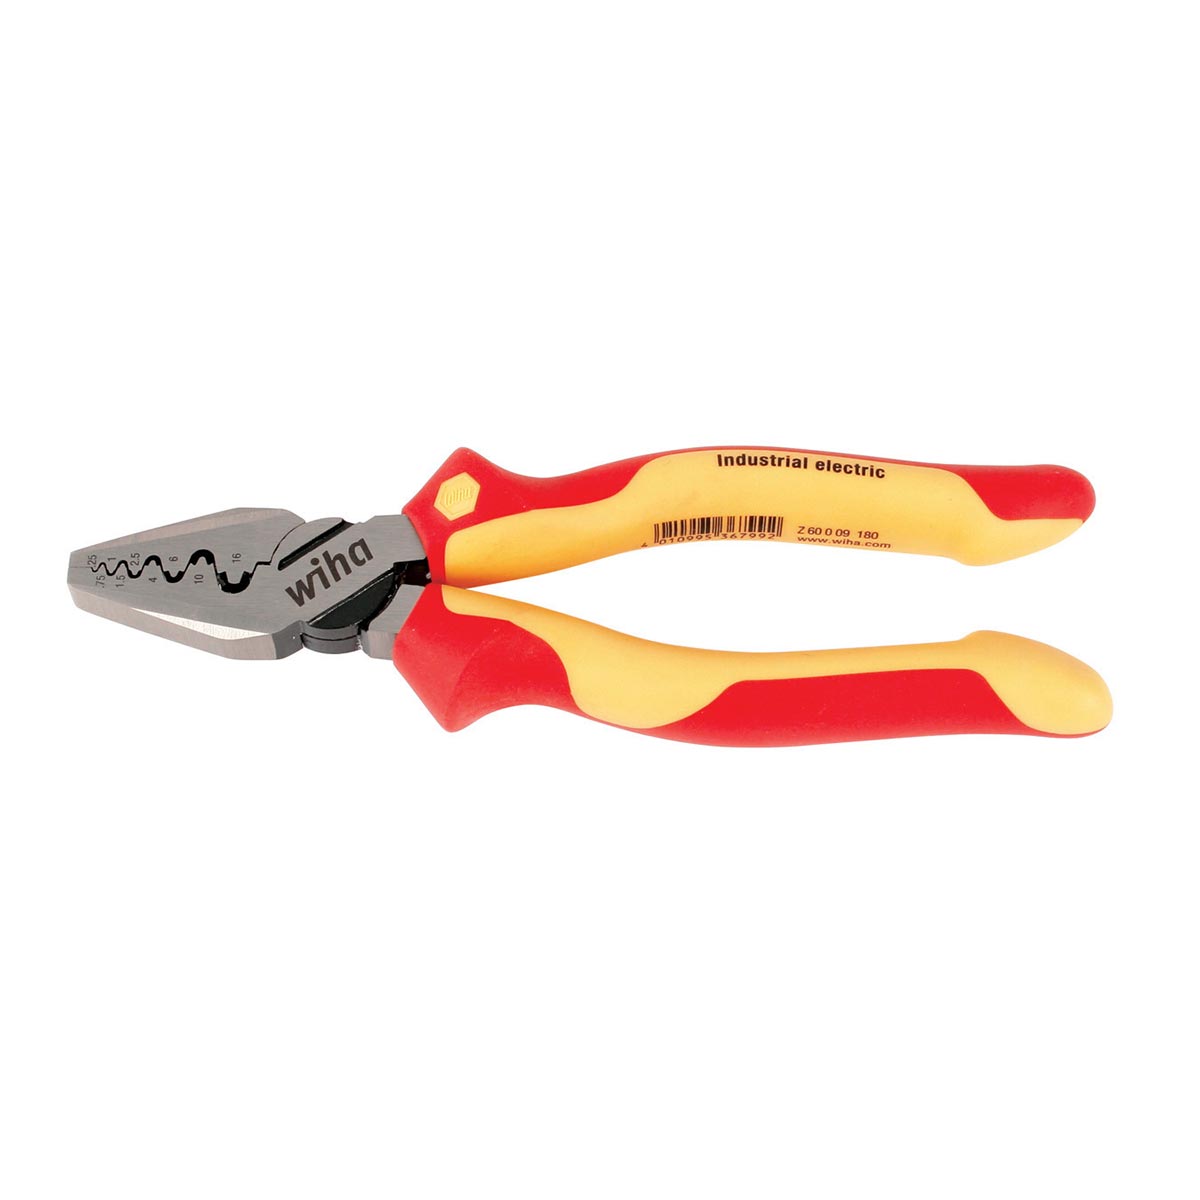 Wiha 32945 Insulated Industrial 7" Crimping Pliers